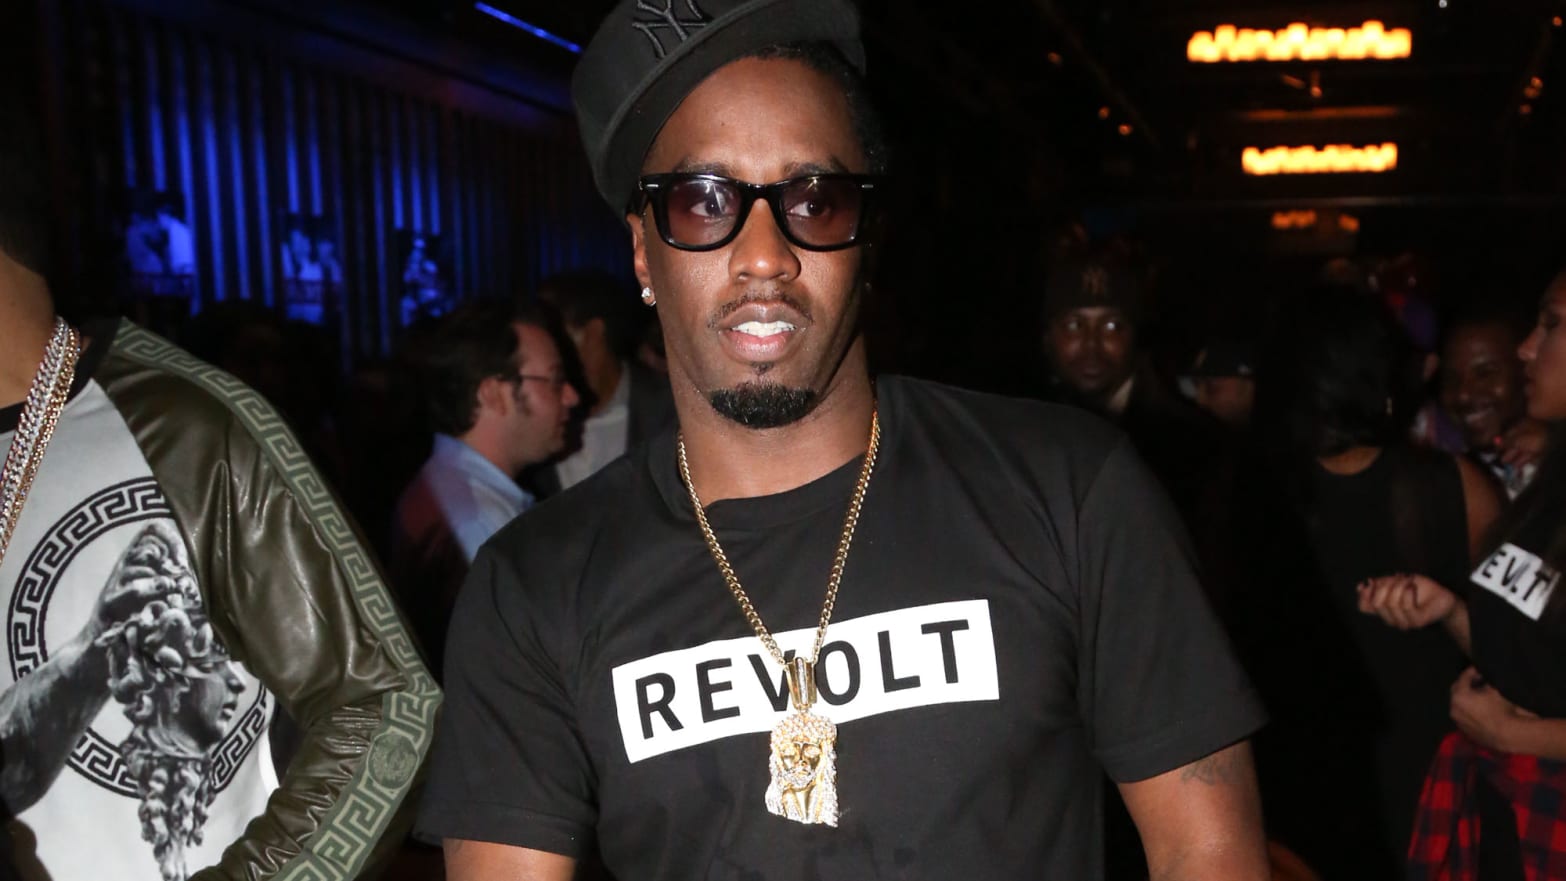 Diddy attends the Revolt launch party at Slate on October 21, 2013.